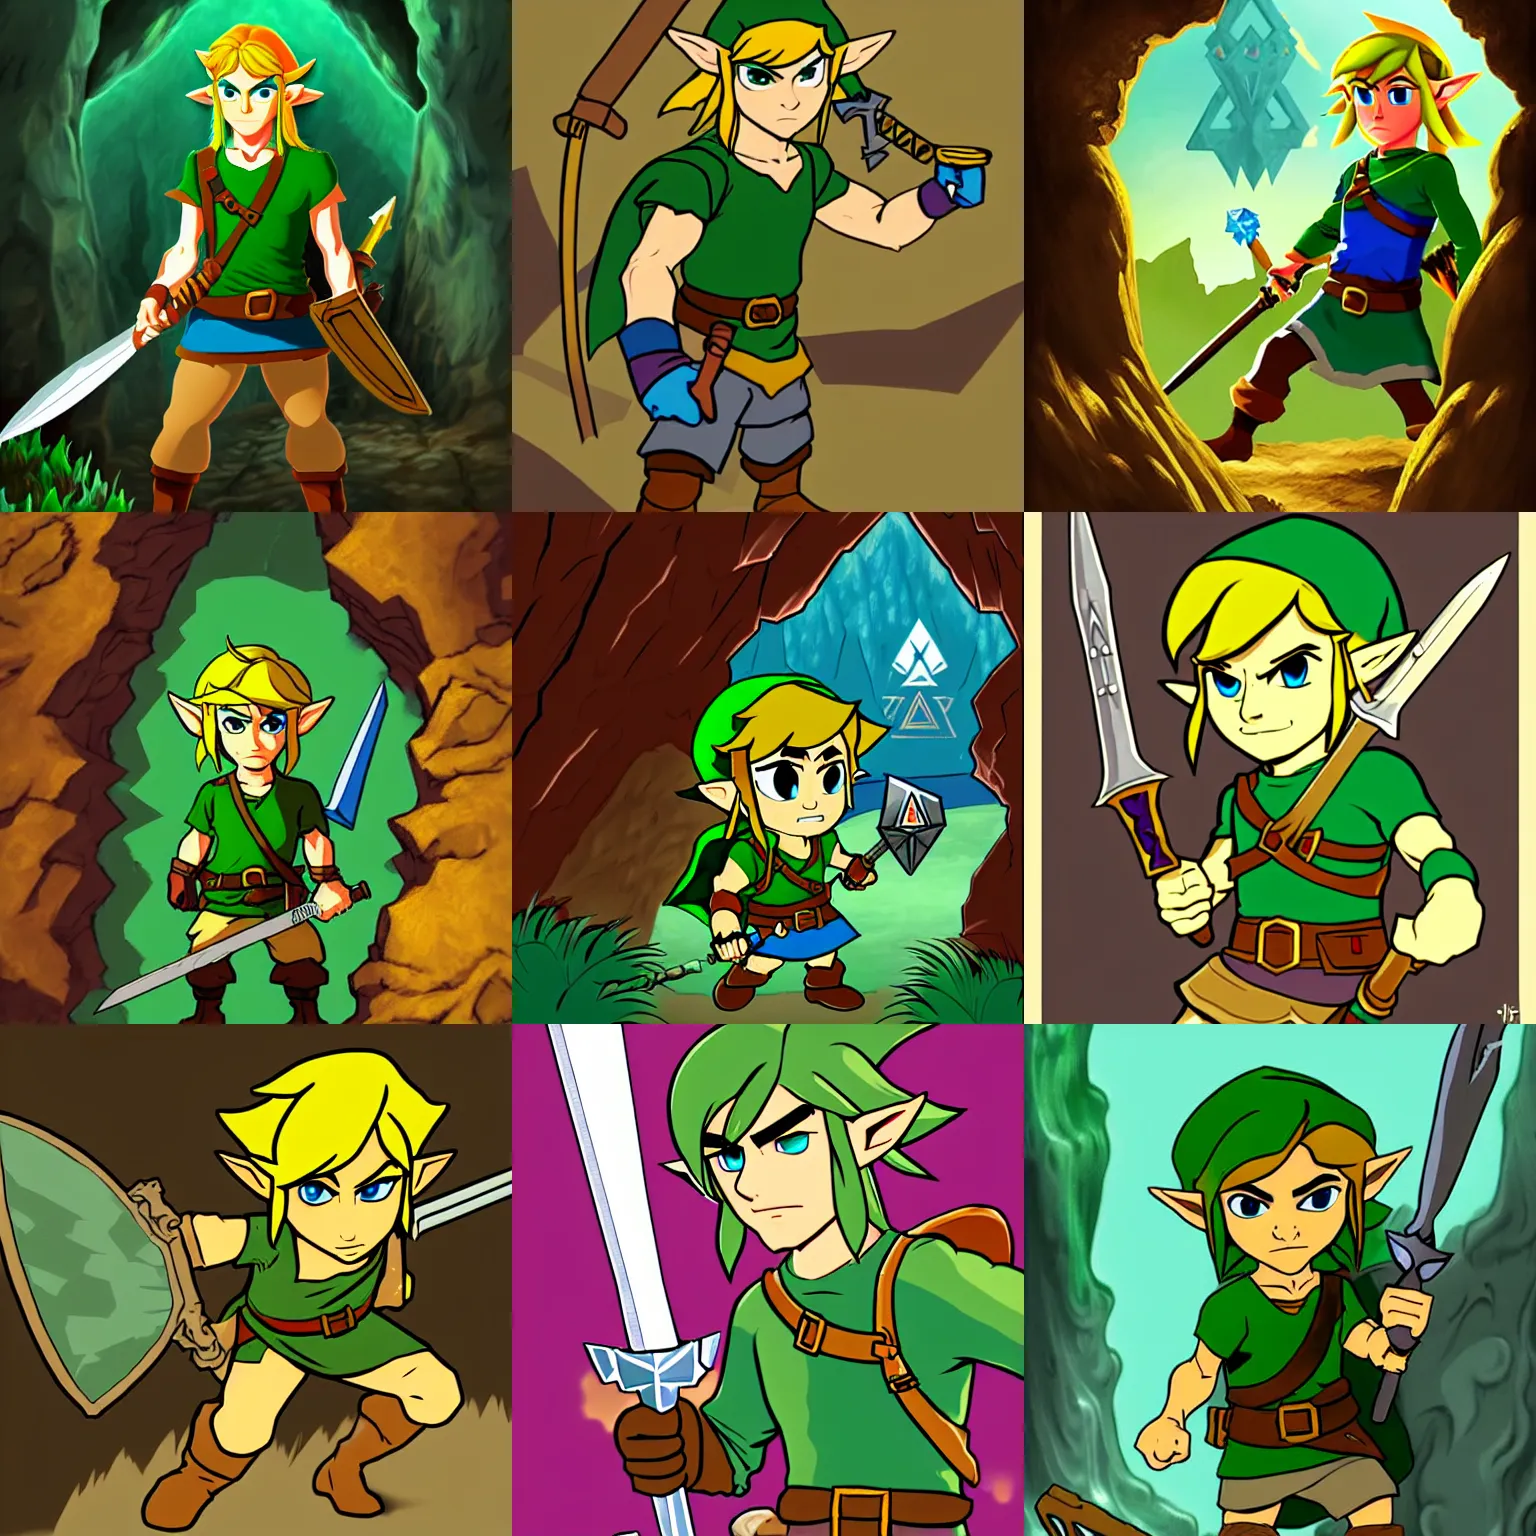 Prompt: link in a cave, legend of zelda, mature, dungeons and dragons, in the style of ralph bakshi, key art